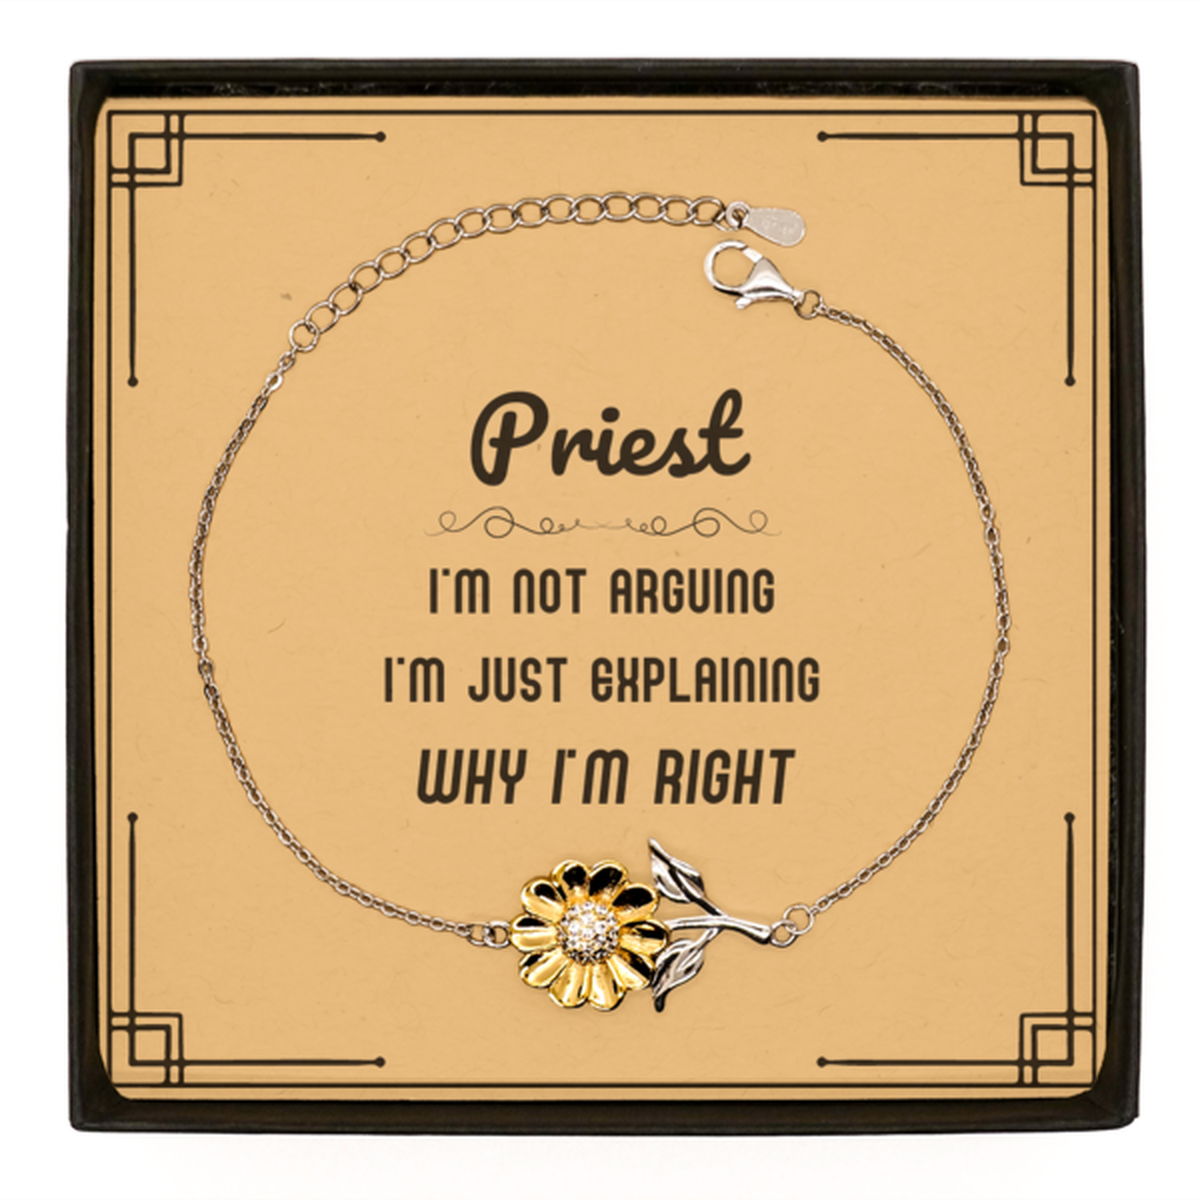 Priest I'm not Arguing. I'm Just Explaining Why I'm RIGHT Sunflower Bracelet, Funny Saying Quote Priest Gifts For Priest Message Card Graduation Birthday Christmas Gifts for Men Women Coworker